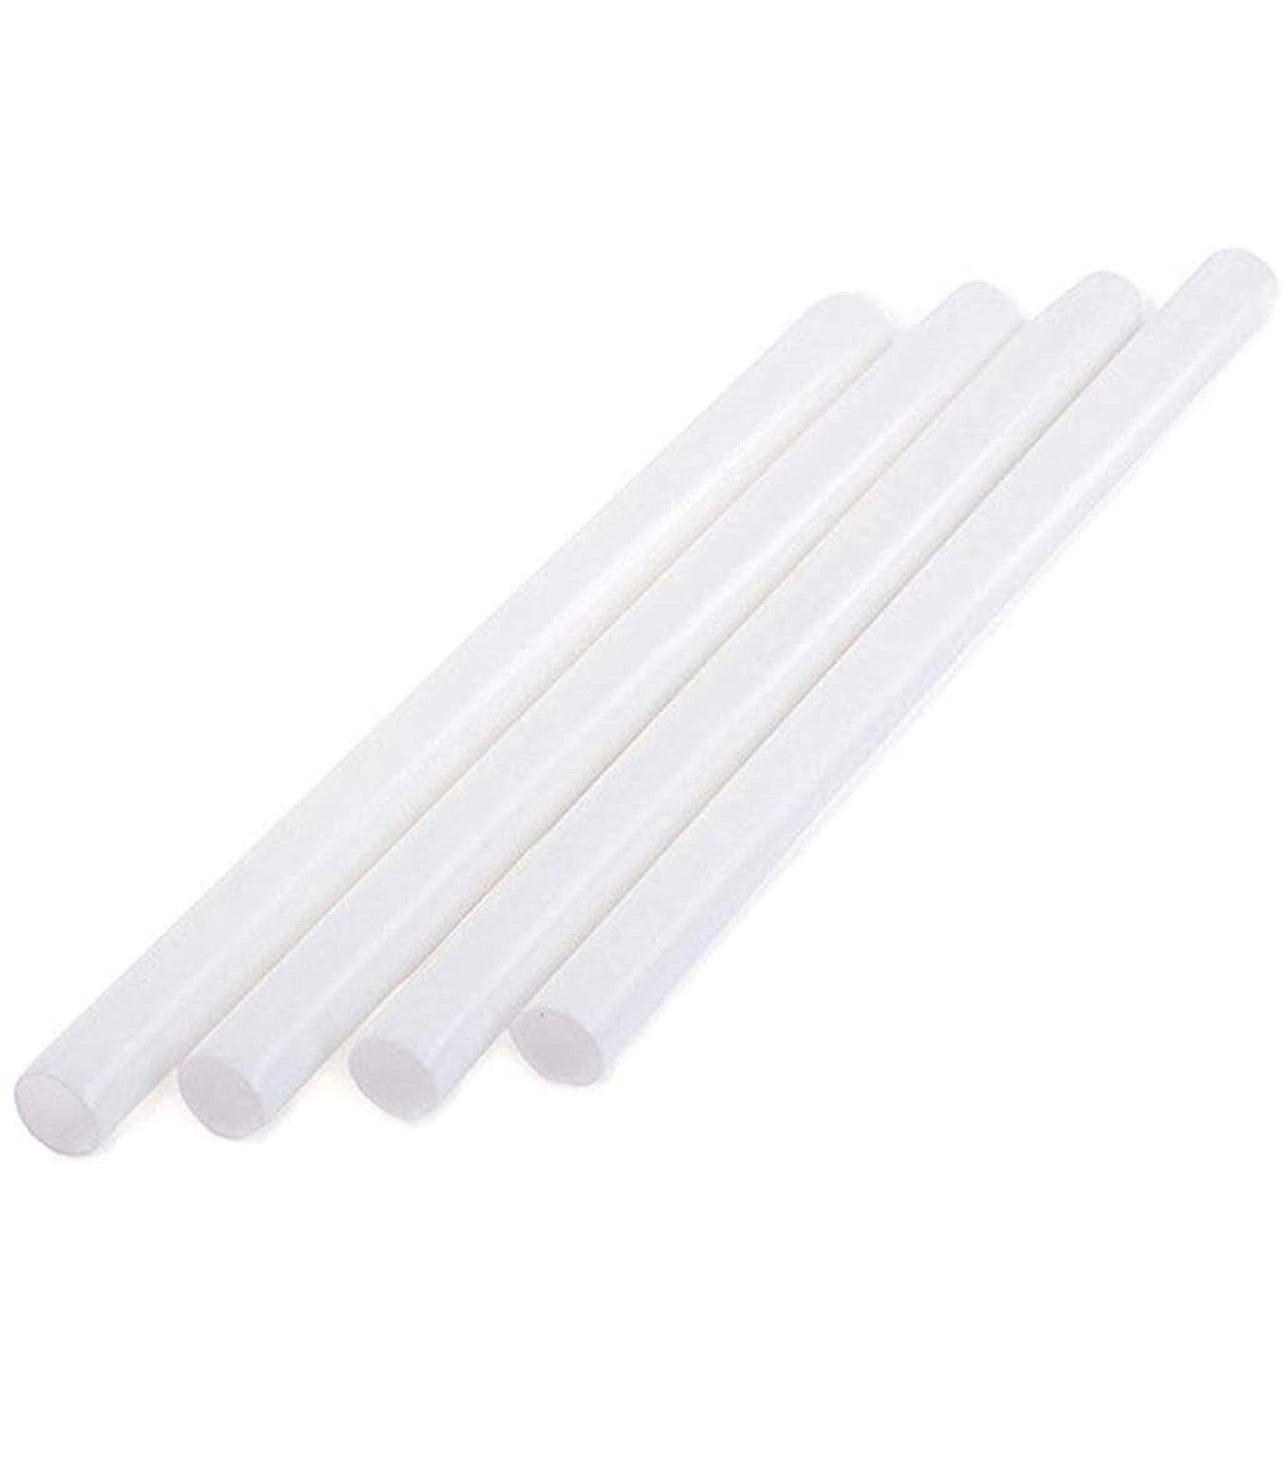 Plastic Dowels Rod for Cake & Cookie Decorating Pack of 4 || Dowel Kitchen and Baking Accessories and Decorating Tools (White, Set of 4)